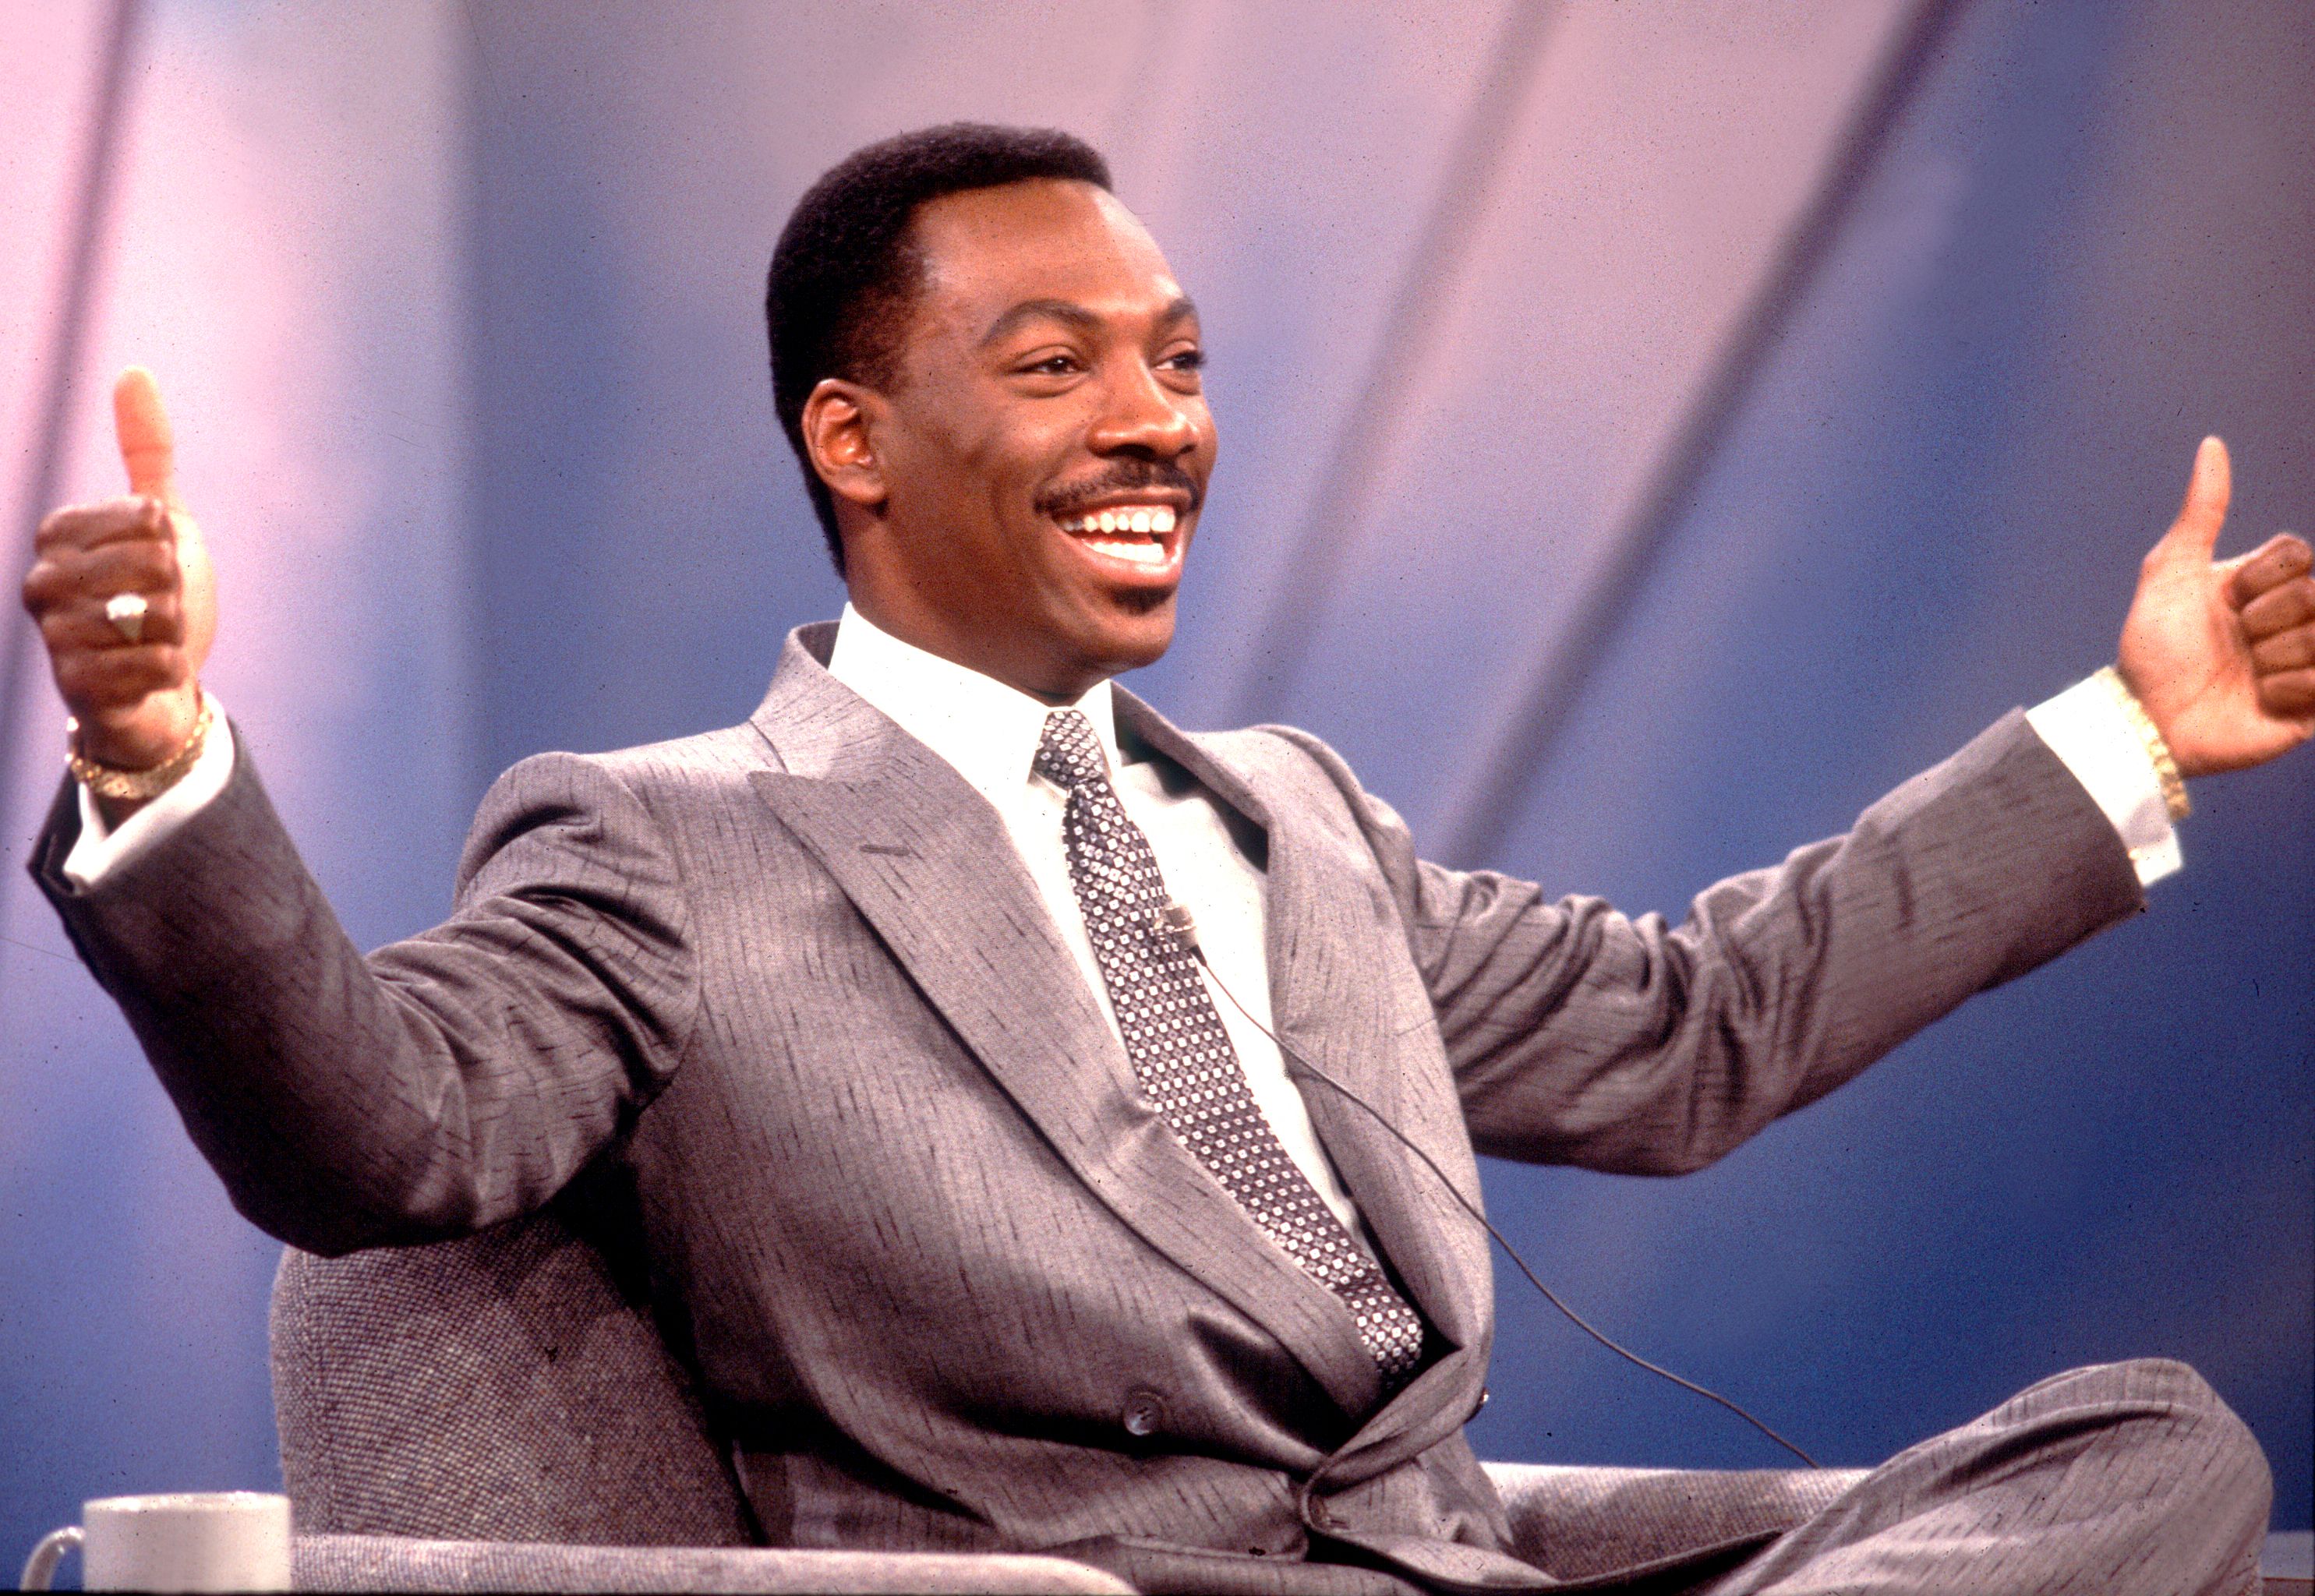 Actor and comedian Eddie Murphy during his 1987 TV guesting at the "Oprah Winfrey Show" in Chicago. | Photo: Getty Images